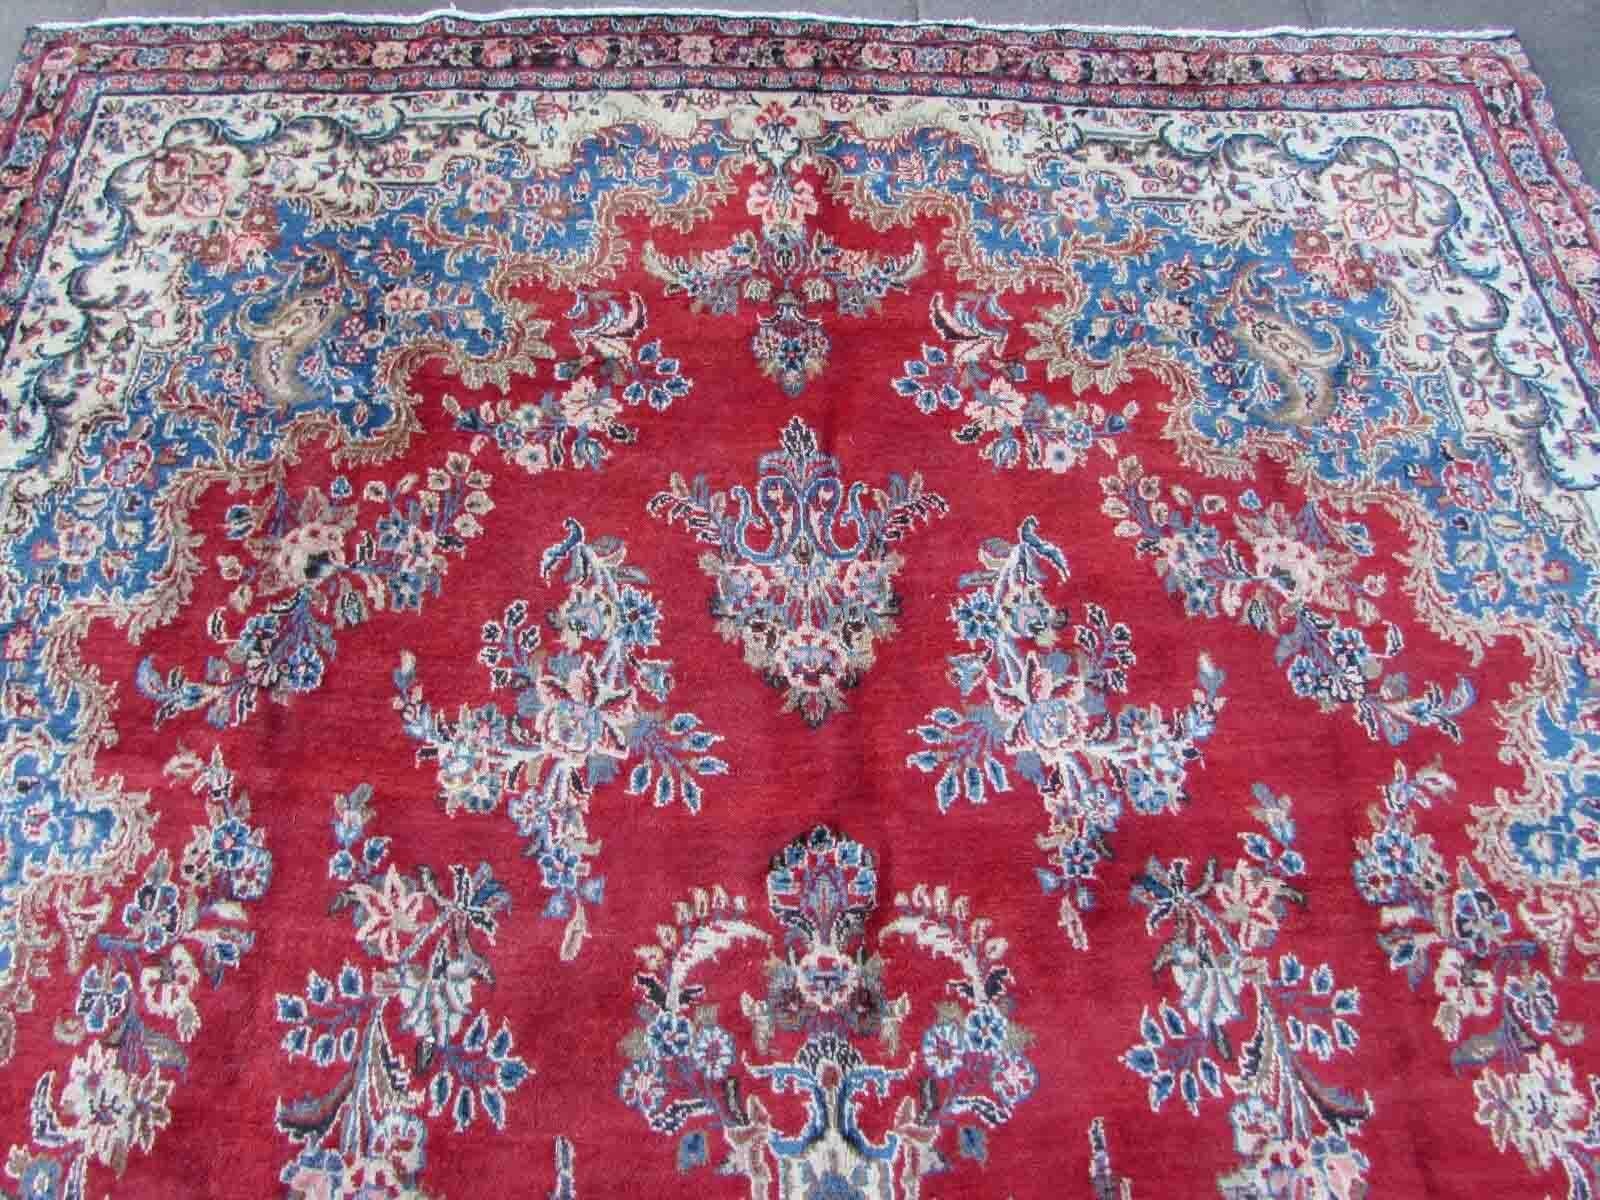 Handmade vintage Kerman rug in bright red and sky blue color. The rug is from the end of 20th century in original condition, it has some low pile.

-condition: original, some low pile, 

-circa: 1970s,

-size: 7.3' x 14' (223cm x